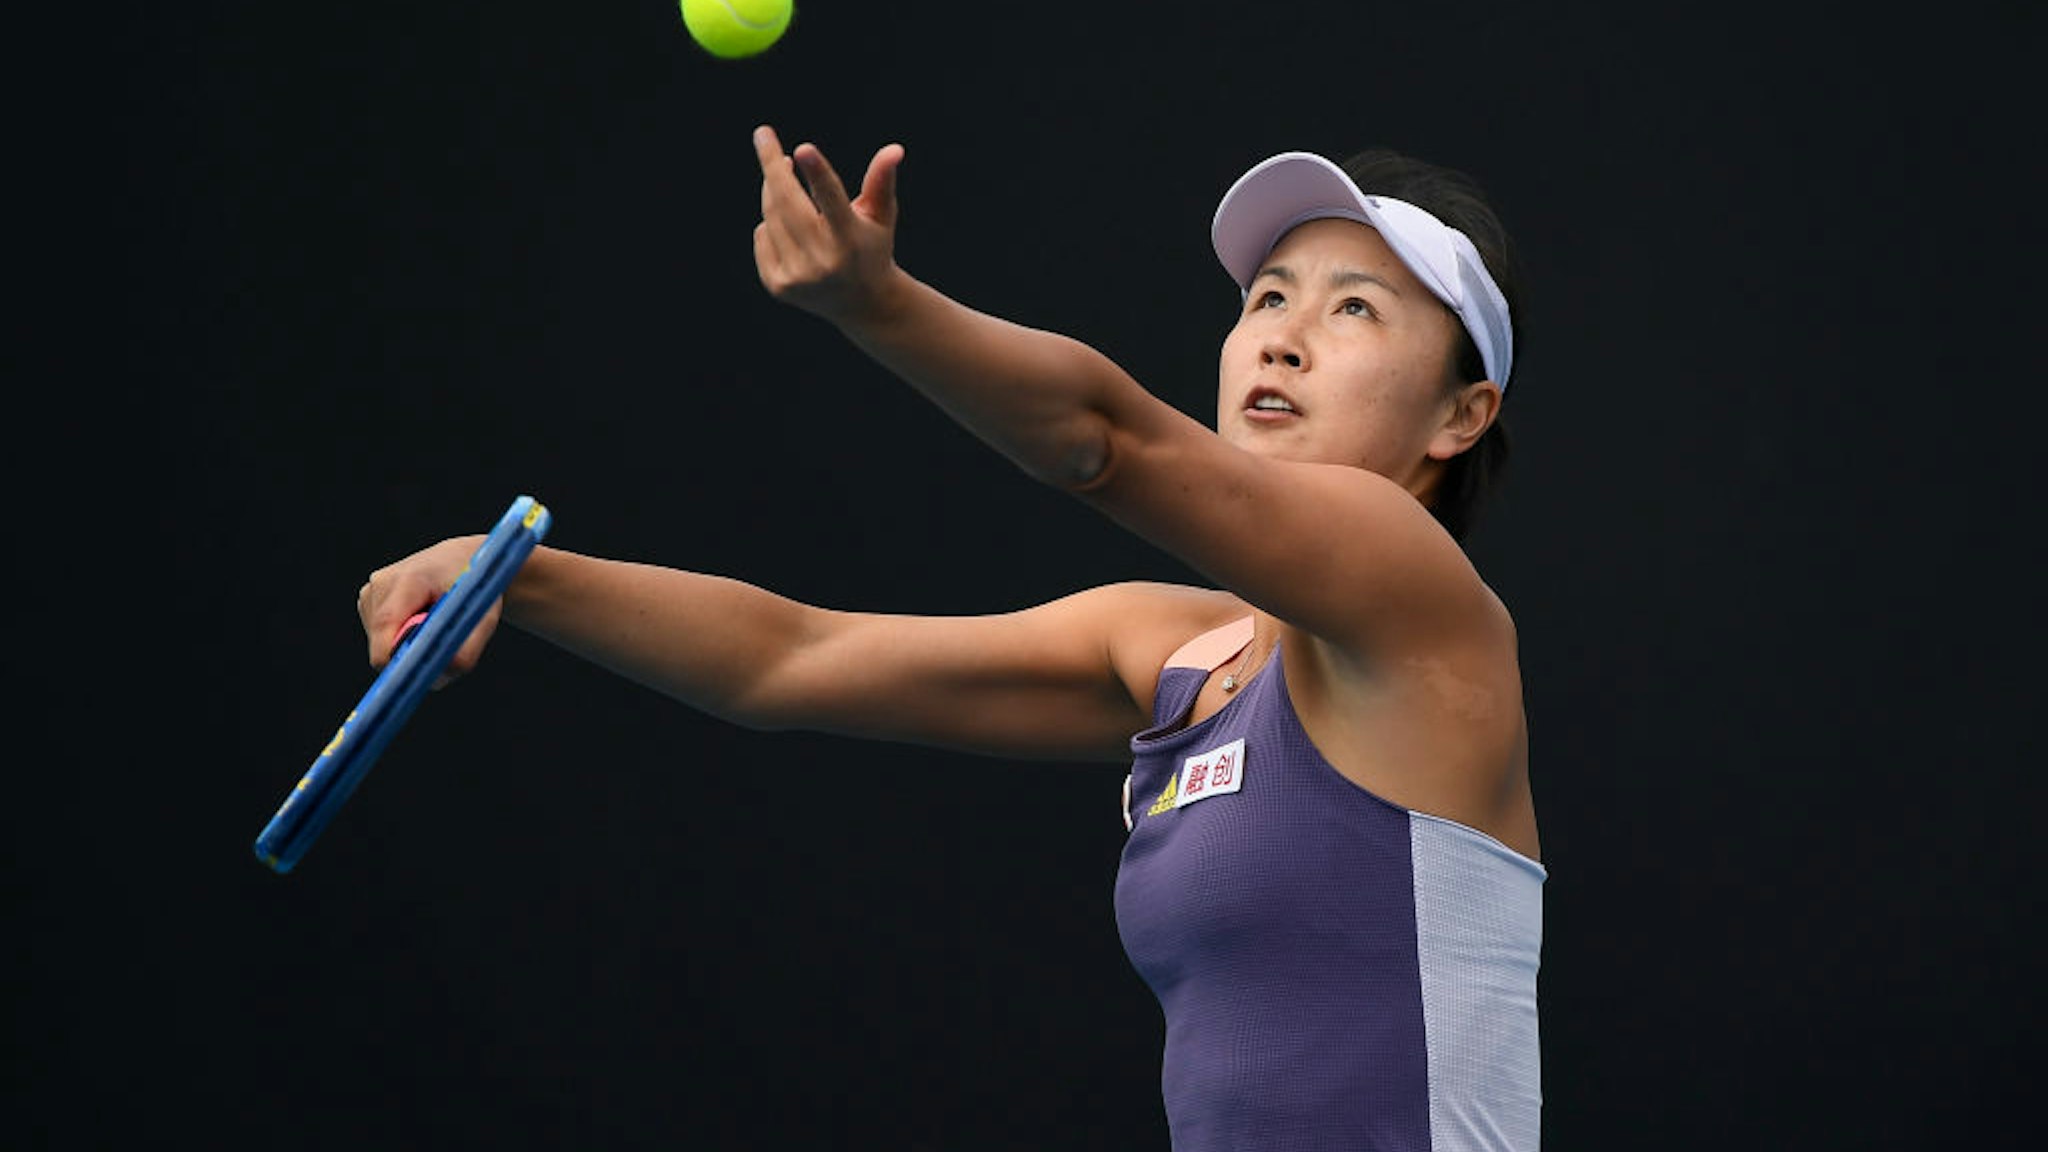 MELBOURNE, AUSTRALIA - JANUARY 21: Shuai Peng of China in action during her Women's Singles first round match against Nao Hibino of Japan on day two of the 2020 Australian Open at Melbourne Park on January 21, 2020 in Melbourne, Australia. (Photo by Fred Lee/Getty Images)